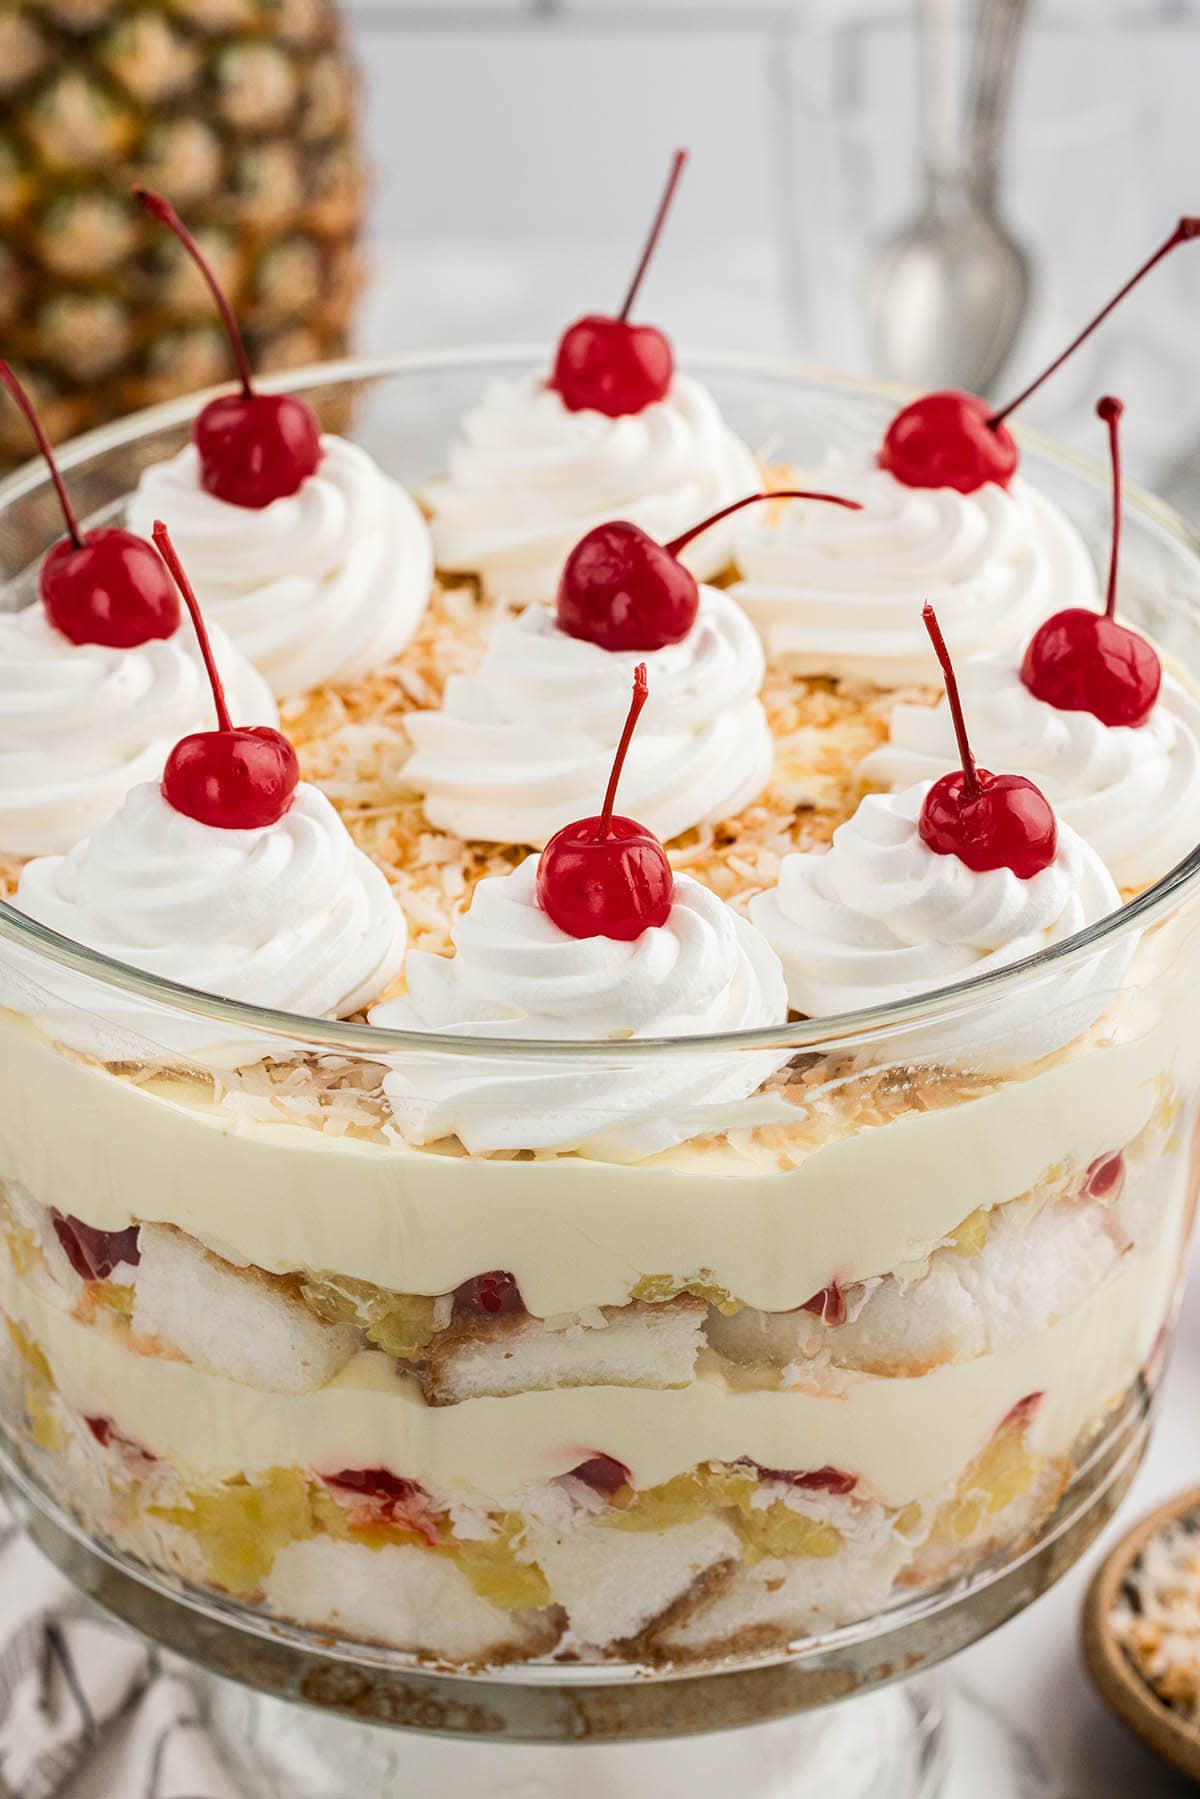 Pina Colada Trifle topped with cool whip dollops and cherries.